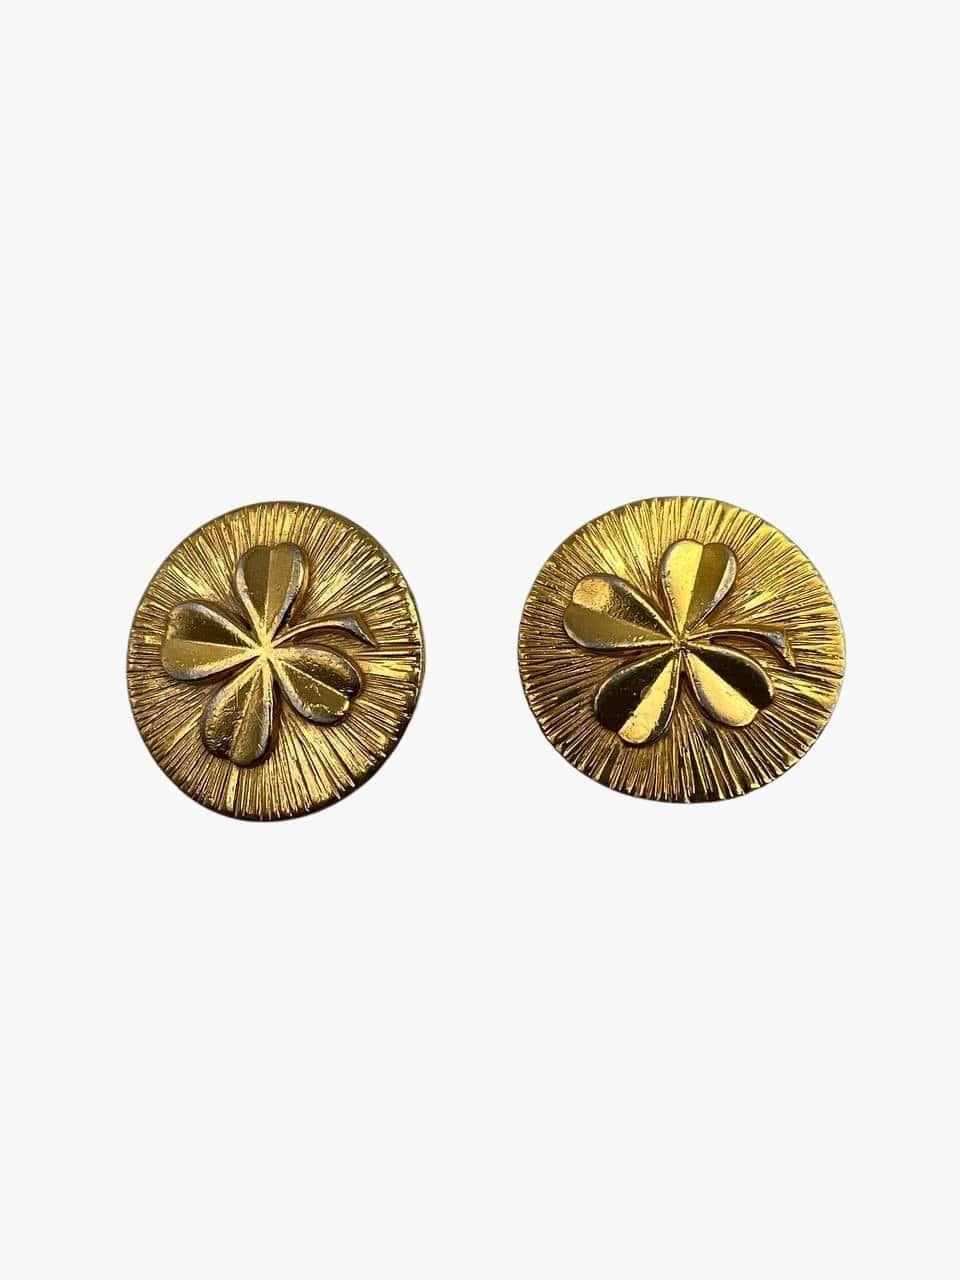 Vintage Chanel gold plated clip-on earrings featuring the four leaf clover, one of Gabrielle Chanel’s lucky charms.

Signed. Chanel. 
Period: 1970s
Diameter: 3,5cm
Condition: very good. Light signs of time throughout metal and scratches at the